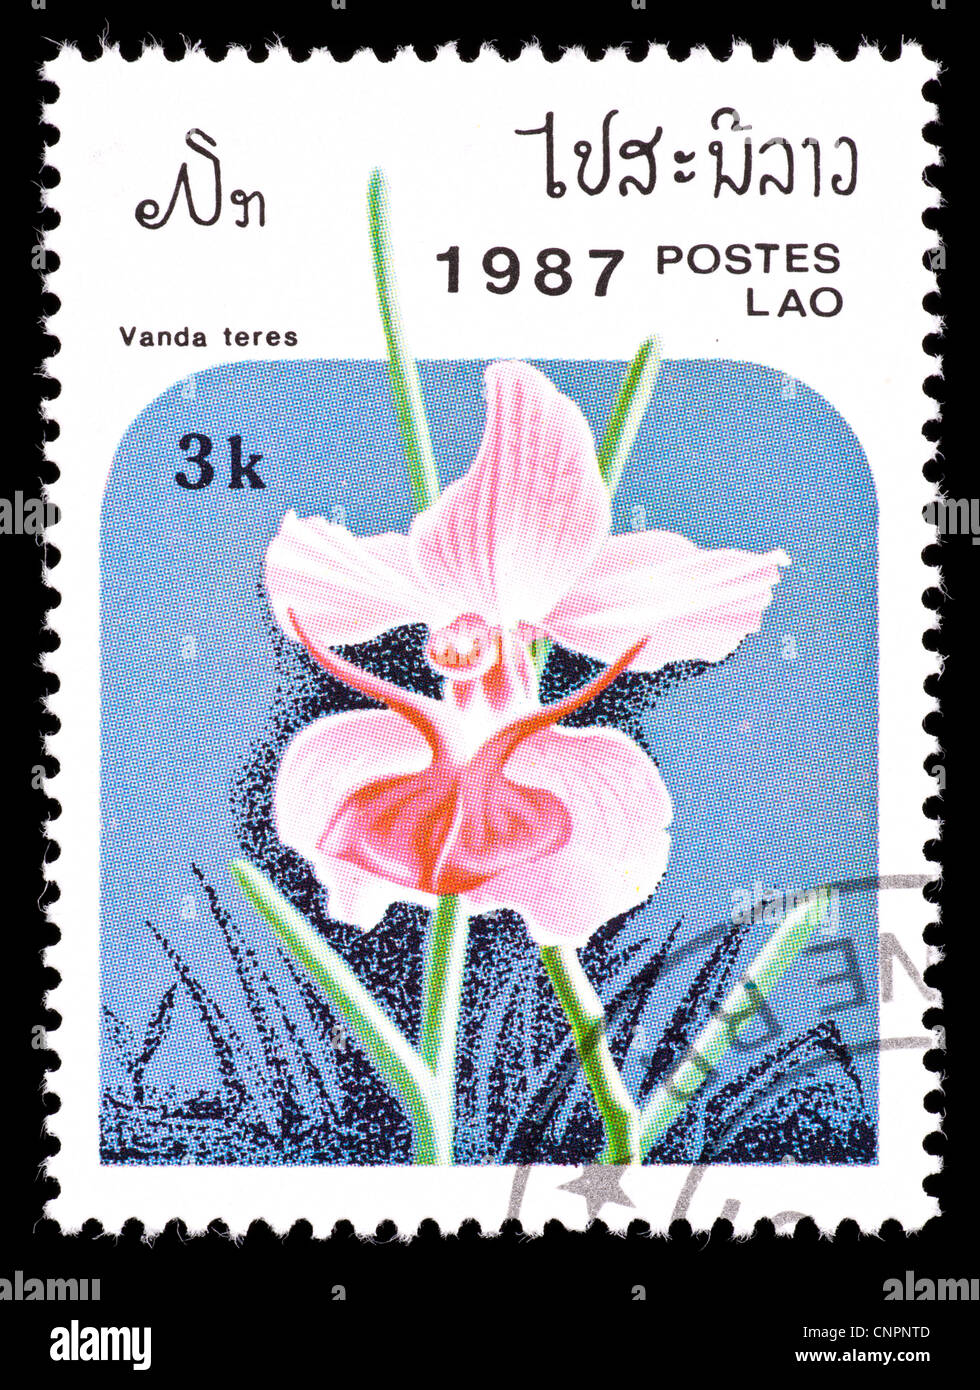 Postage stamp from Laos depicting an orchid (Vanda teres) Stock Photo